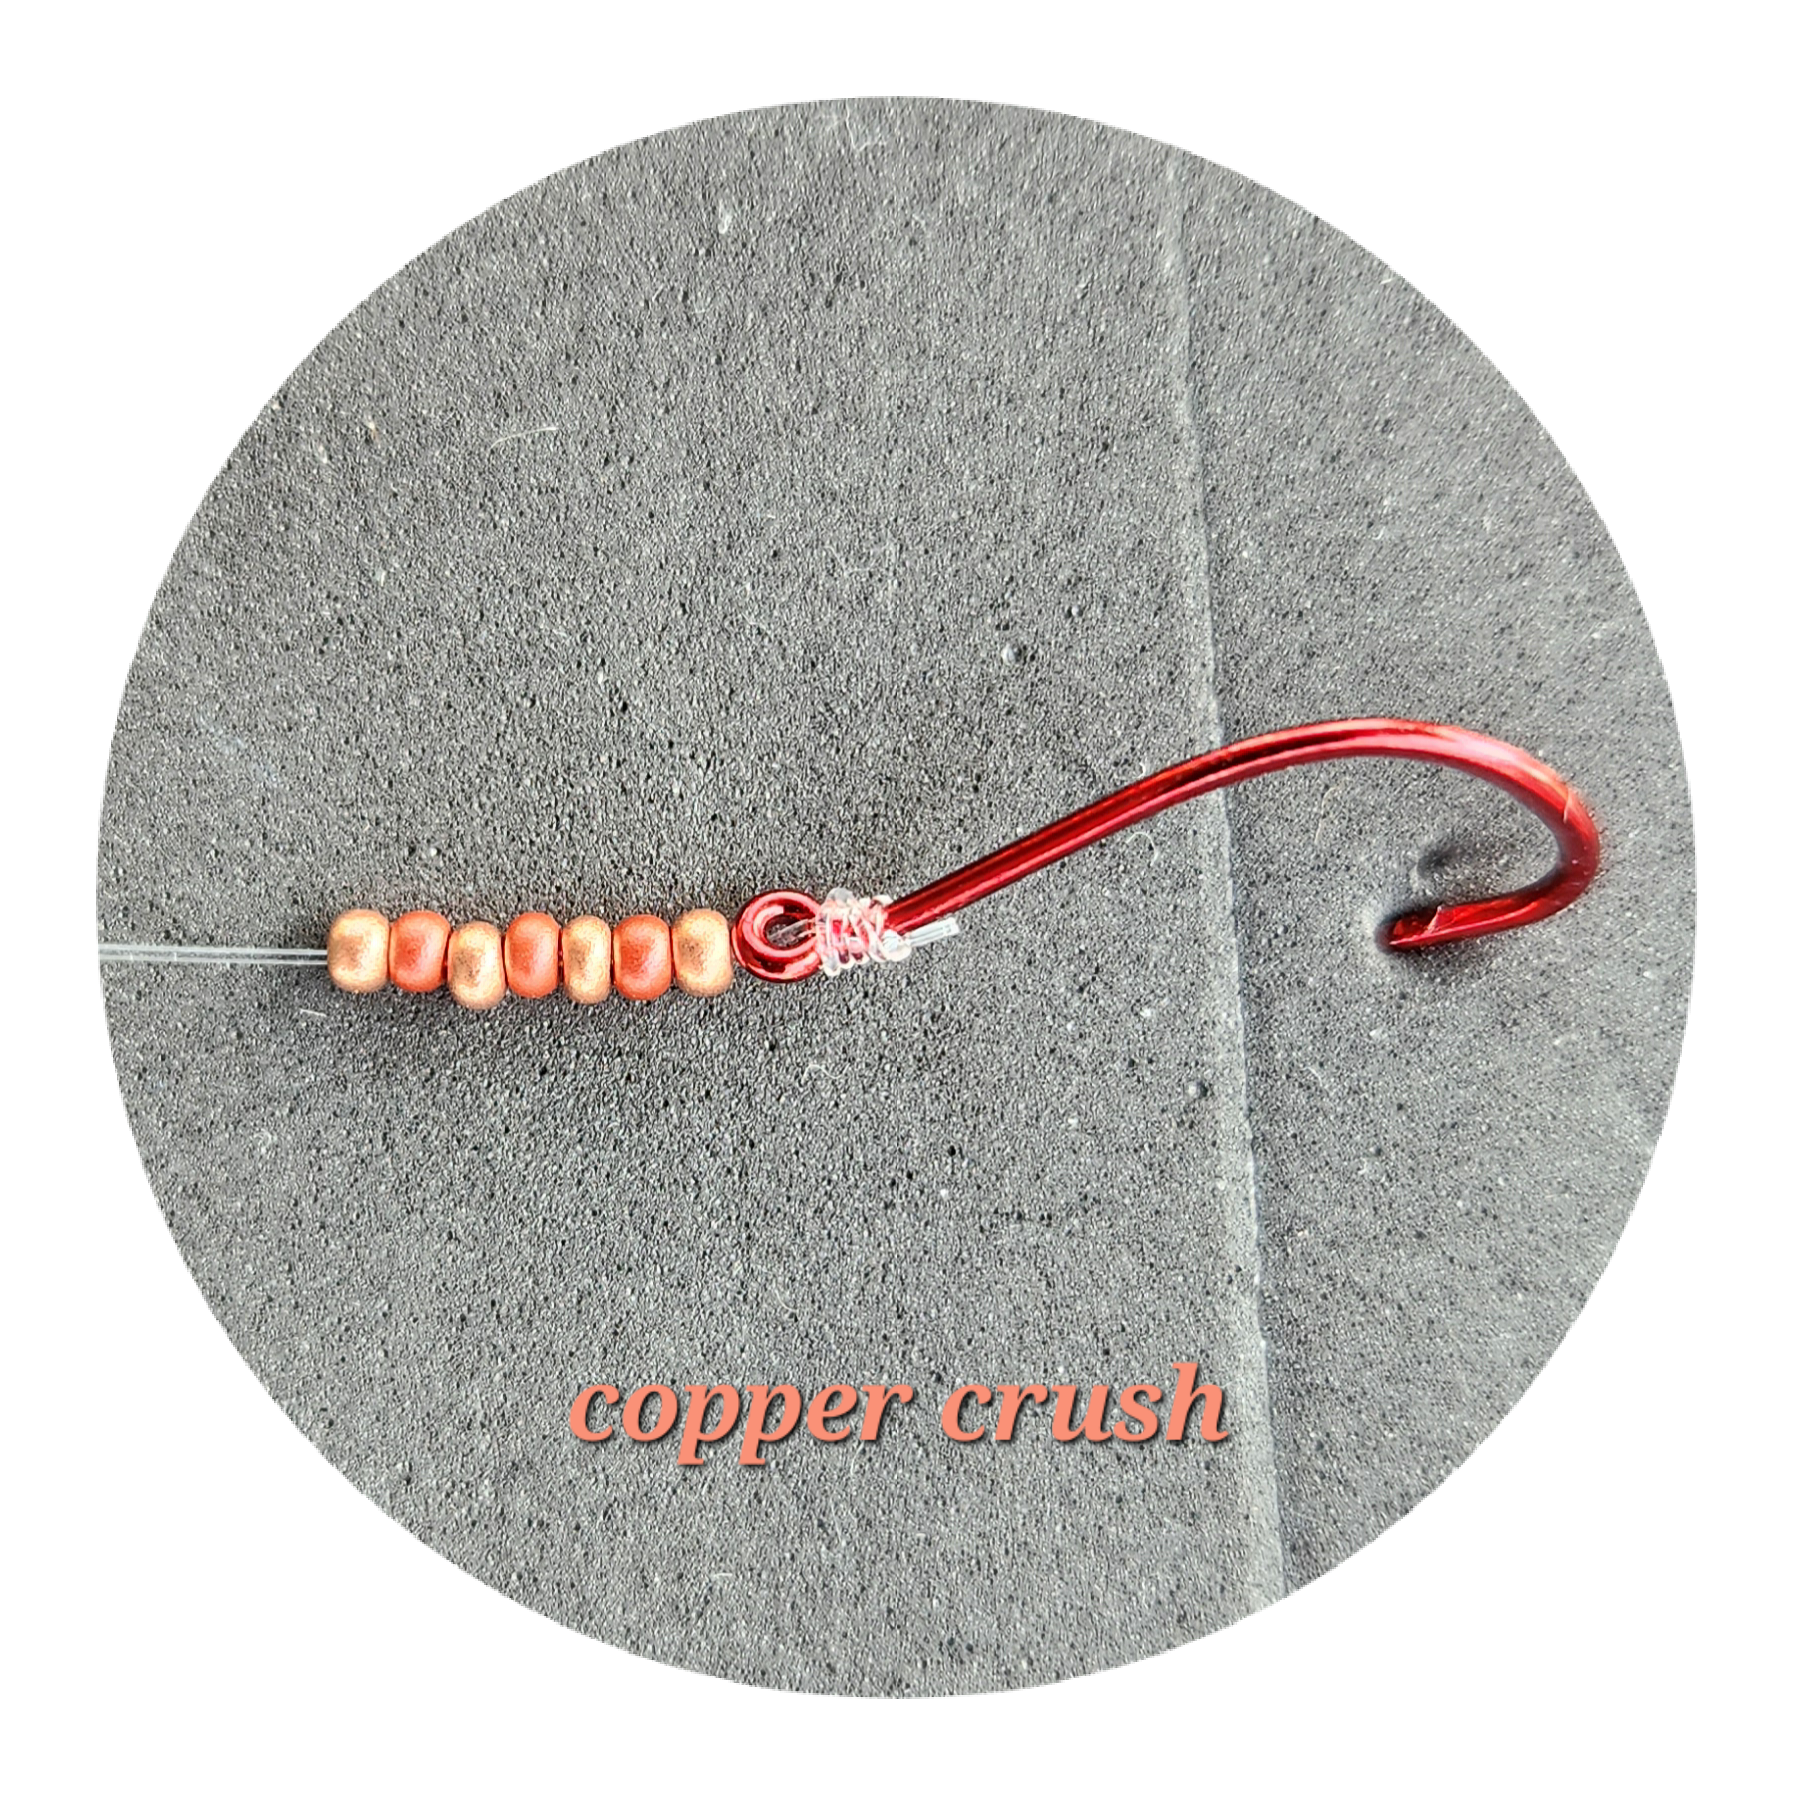 Chasen Walter's Micro Beaded Snell copper crush